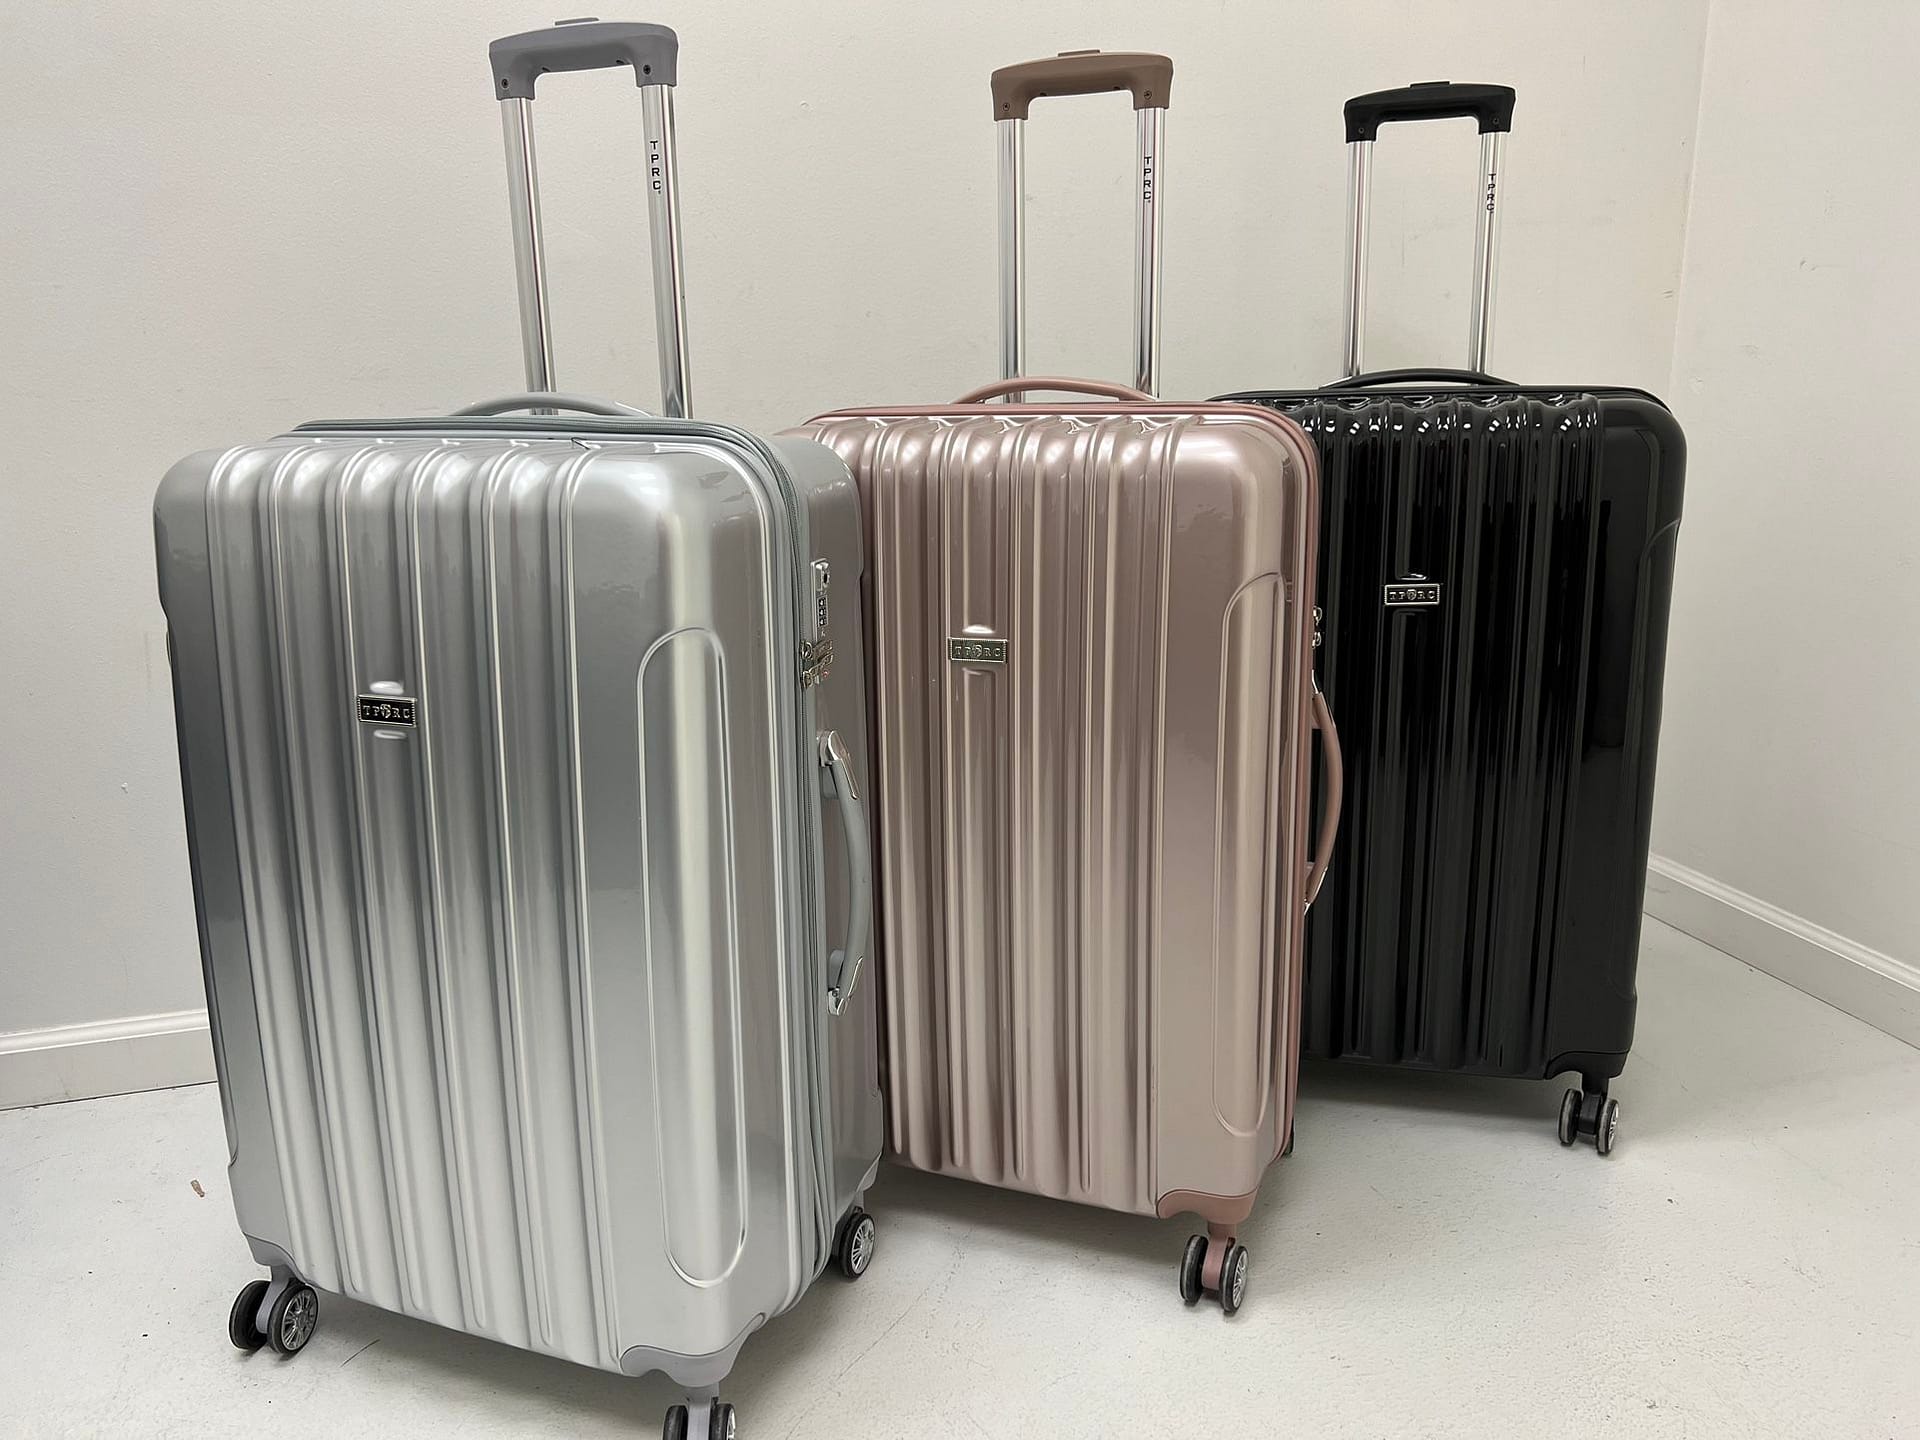 Sold luggages